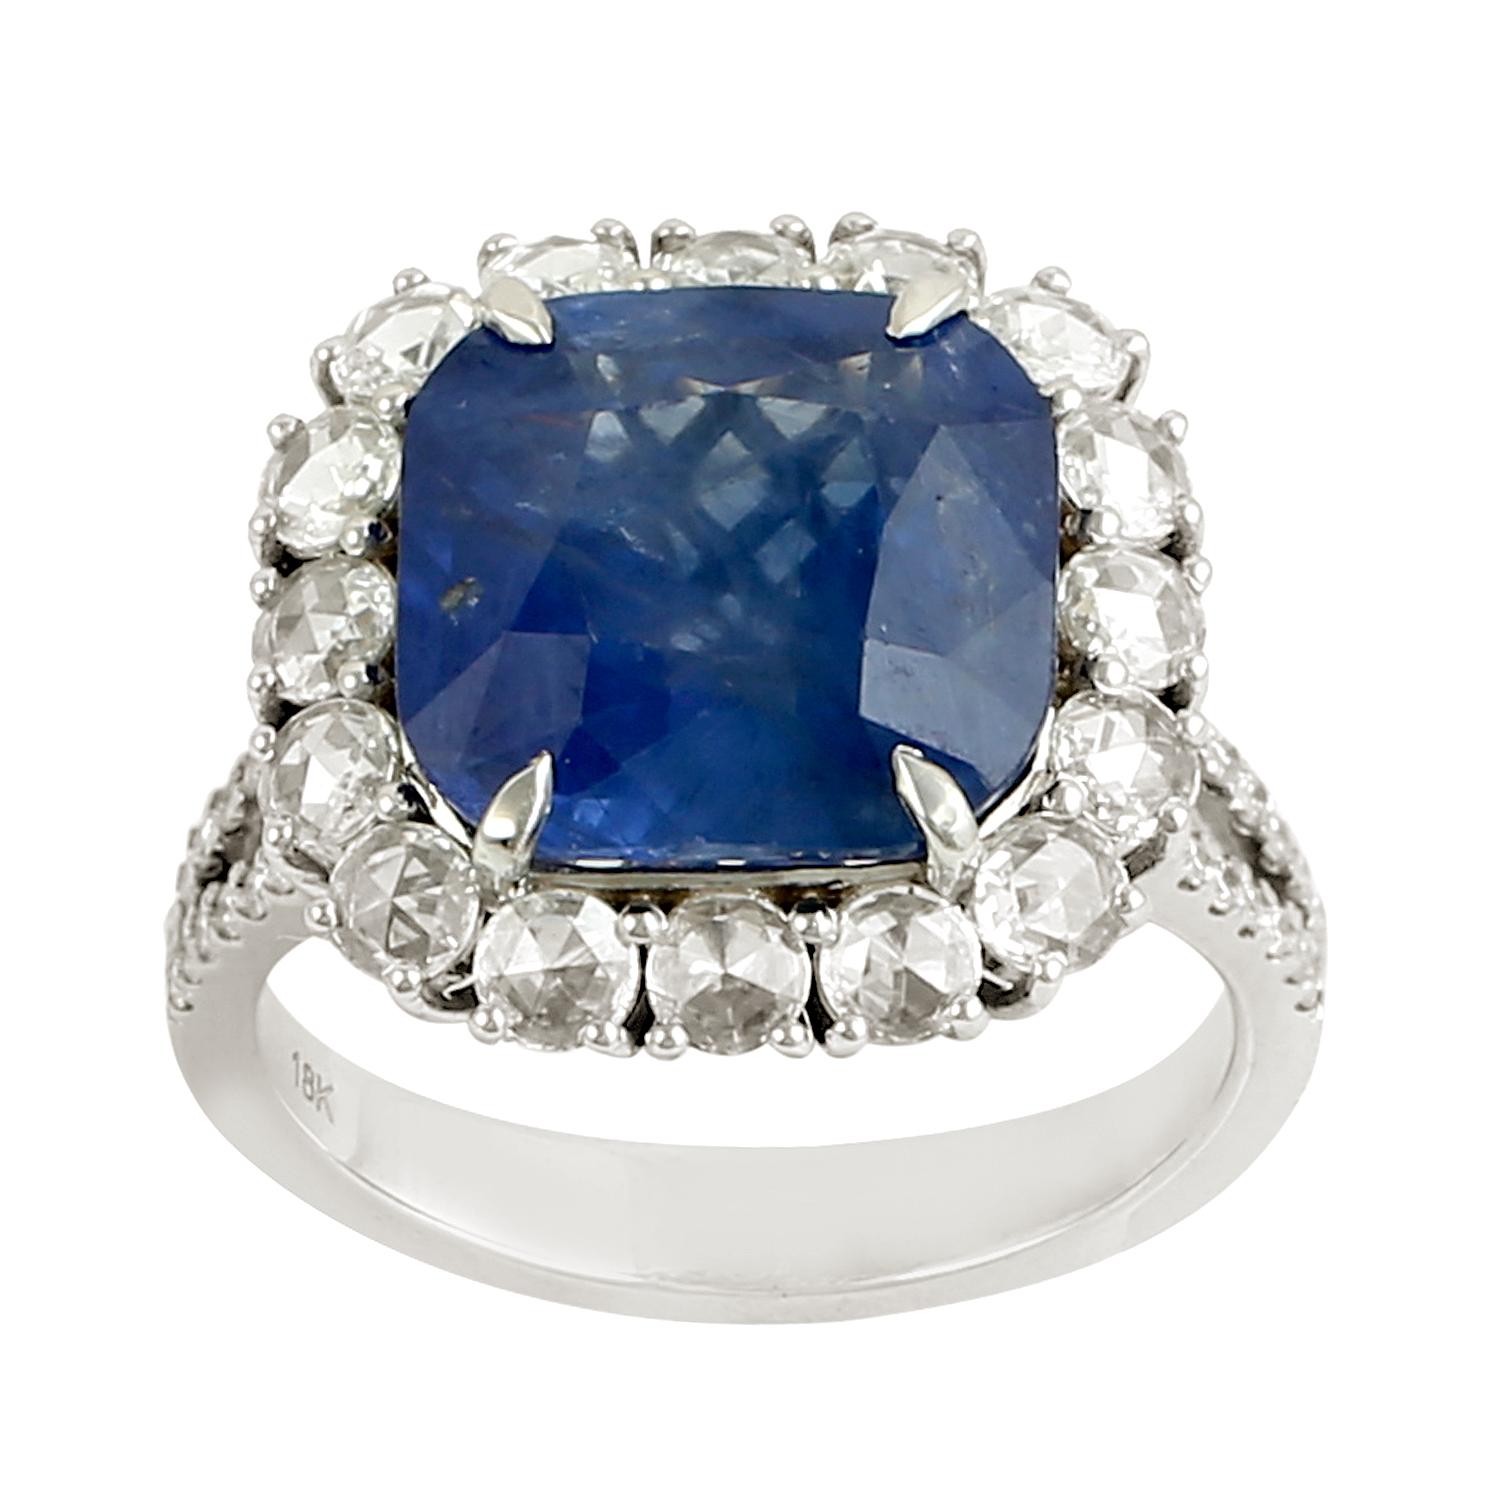 Women's Cushion Shaped Blue Sapphire Cocktail Ring With Diamonds For Sale